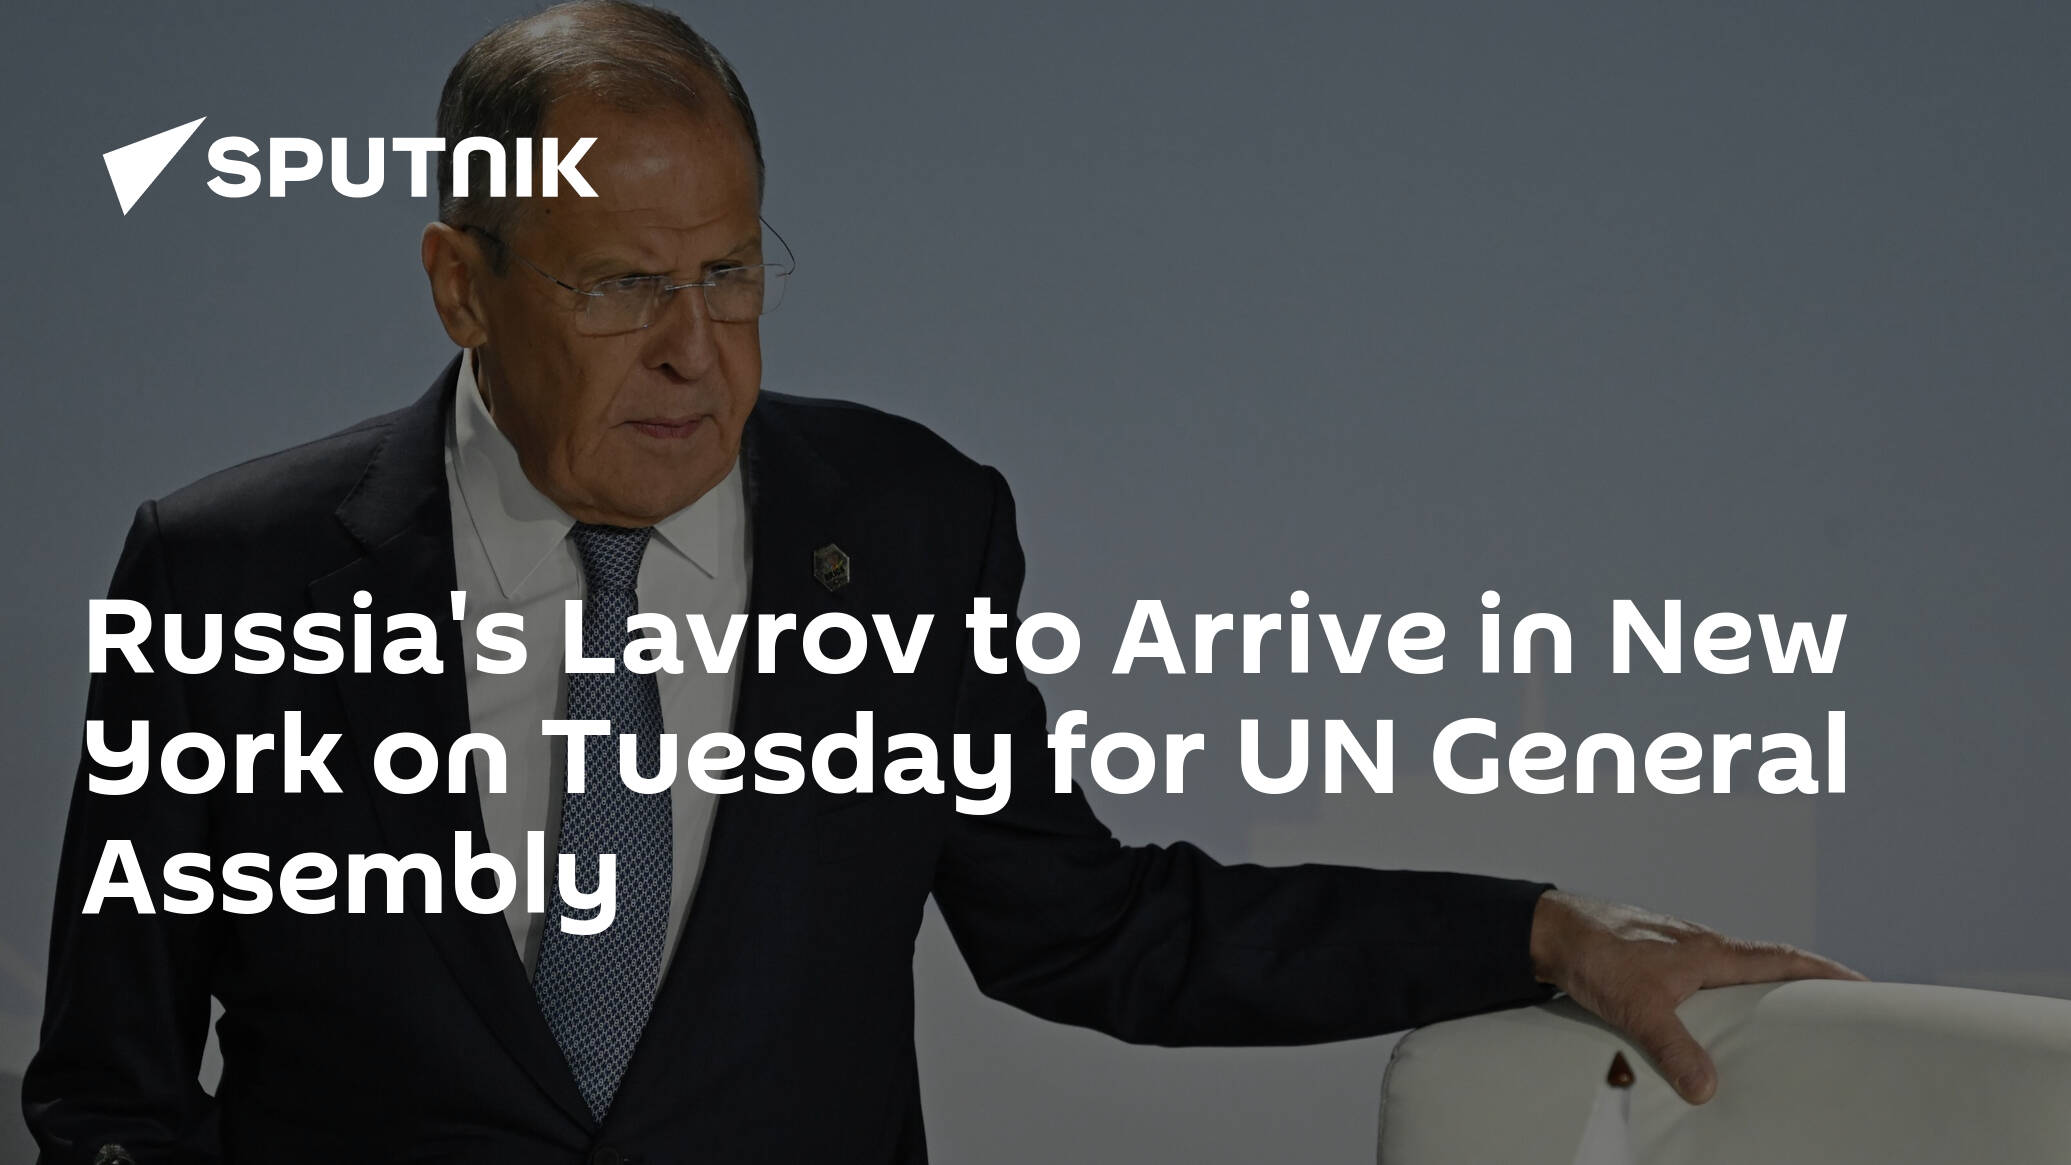 Russia's Lavrov to Arrive in New York on Tuesday for UN General Assembly